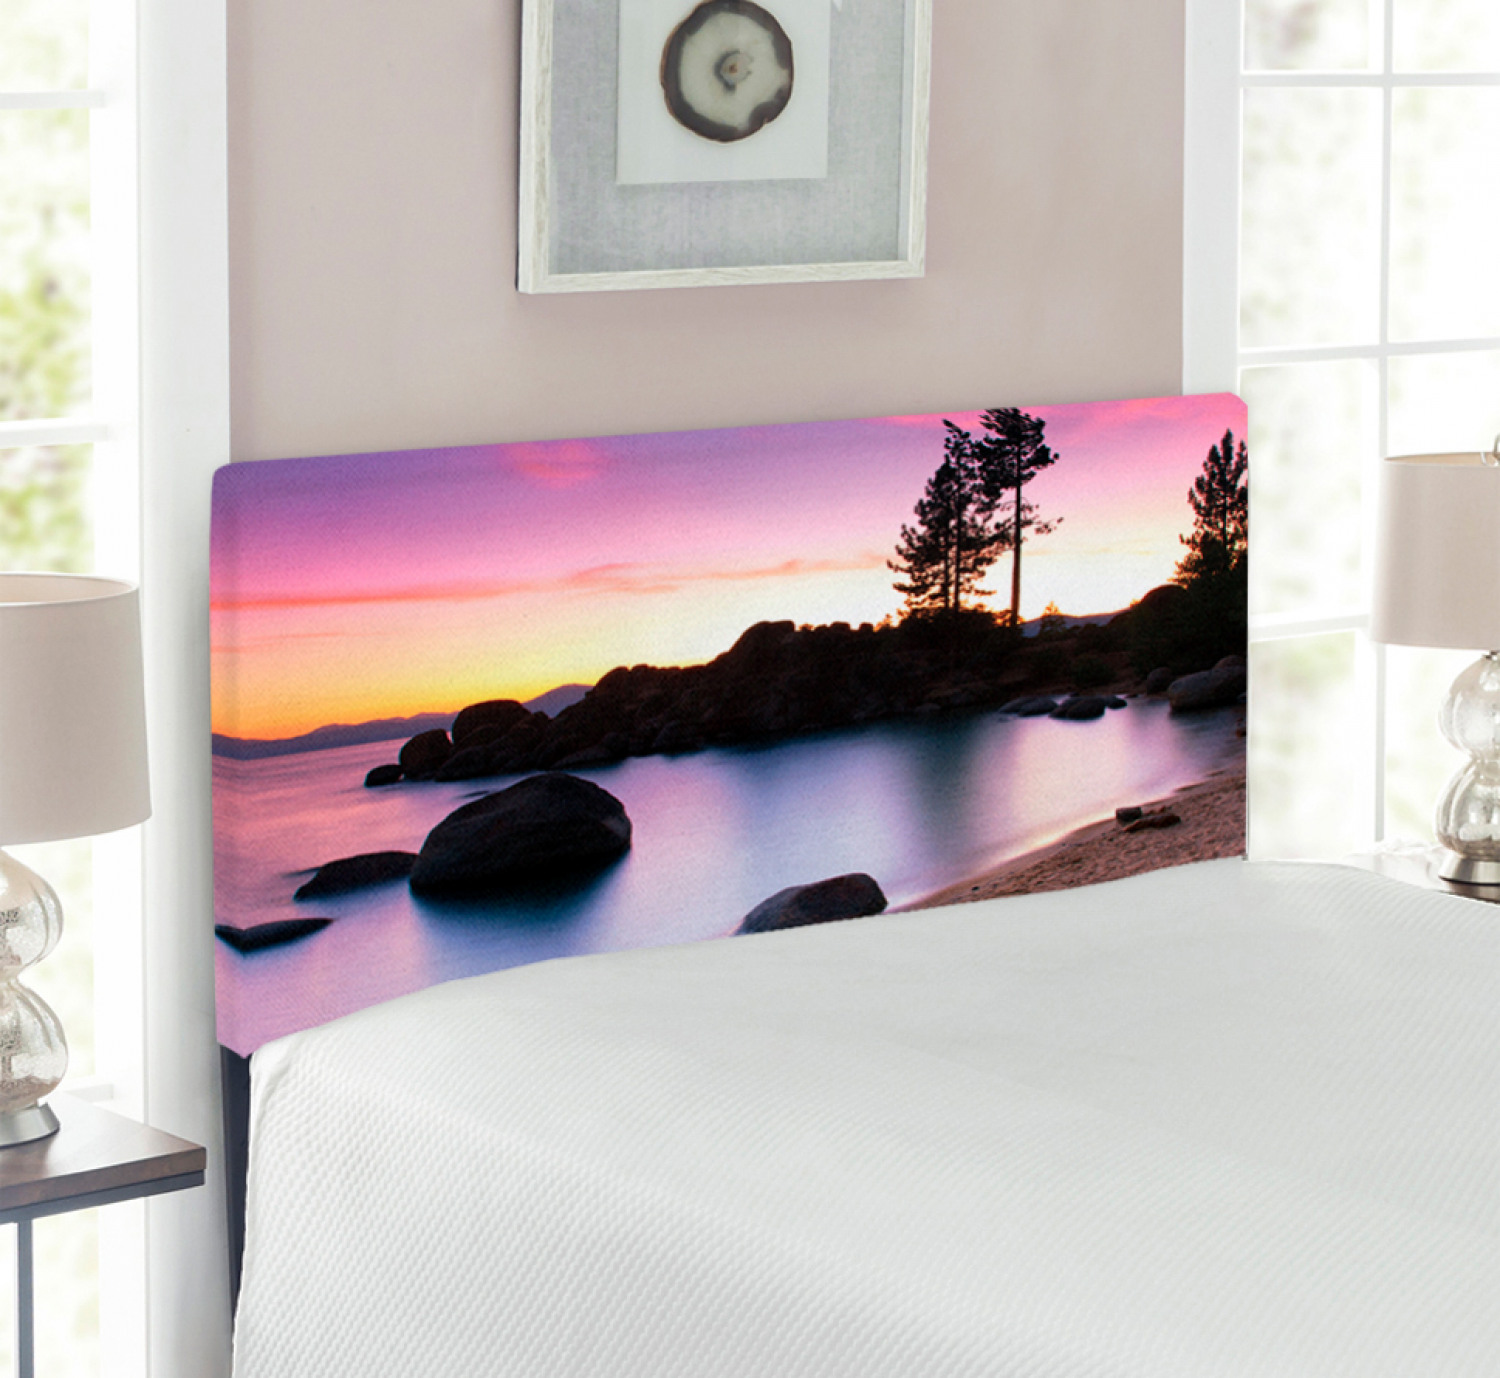 Landscape Headboard, Summer Sandy Beach by the River with Sky Relax Simple Life Art Photo, Upholstered Decorative Metal Bed Headboard with Memory Foam, Twin Size, Purple Cream, by Ambesonne - image 2 of 4